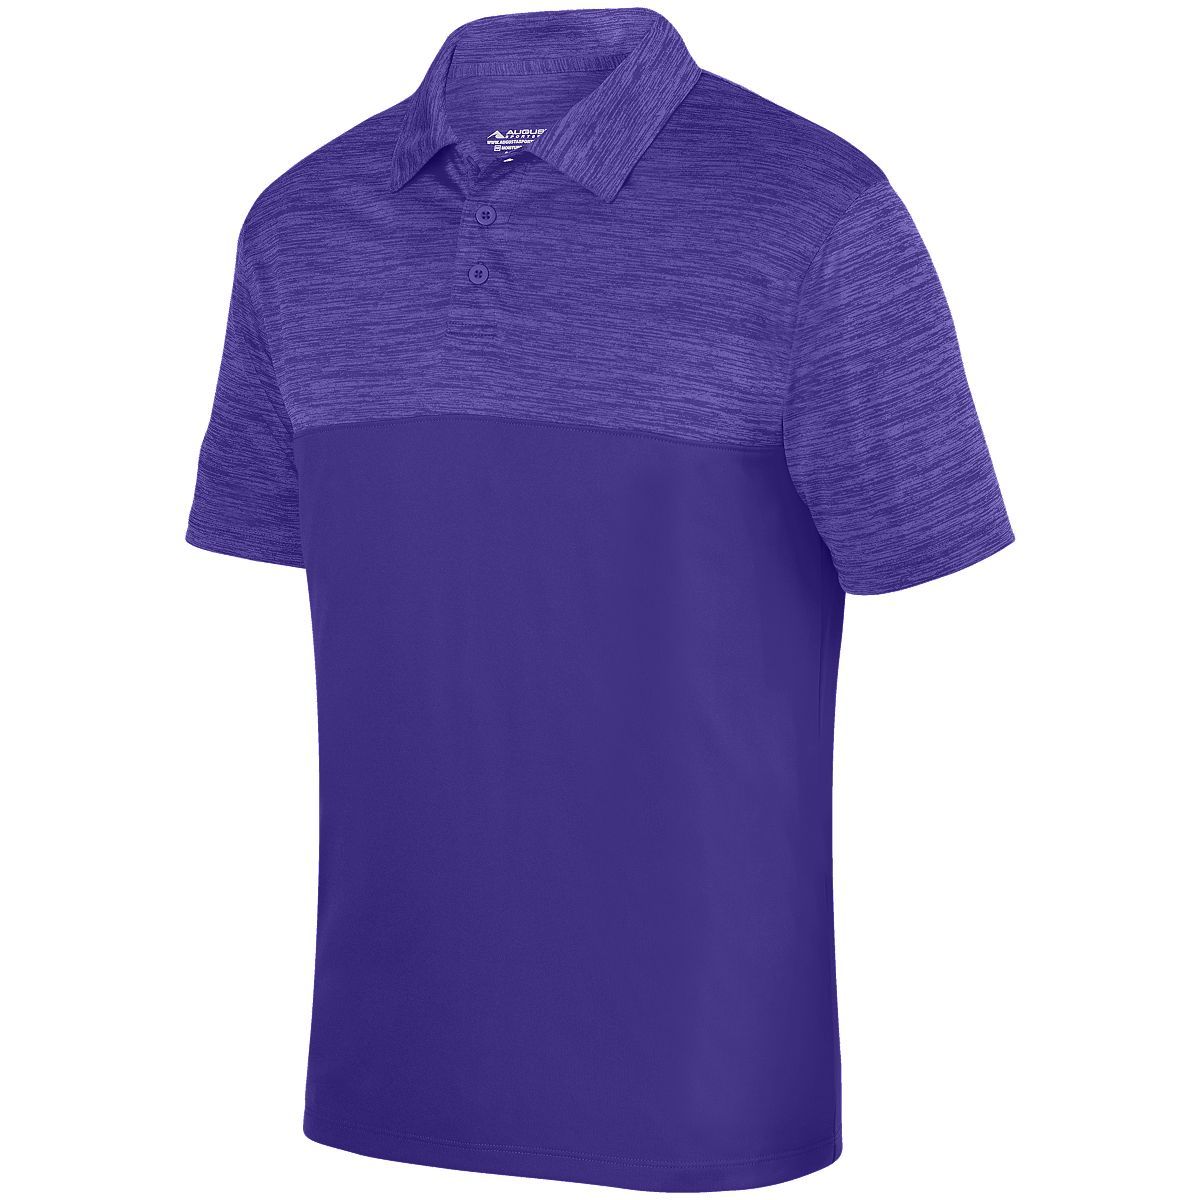 Augusta Sportswear Shadow Tonal Heather Polo in Purple  -Part of the Adult, Adult-Polos, Polos, Augusta-Products, Shirts, Tonal-Fleece-Collection product lines at KanaleyCreations.com